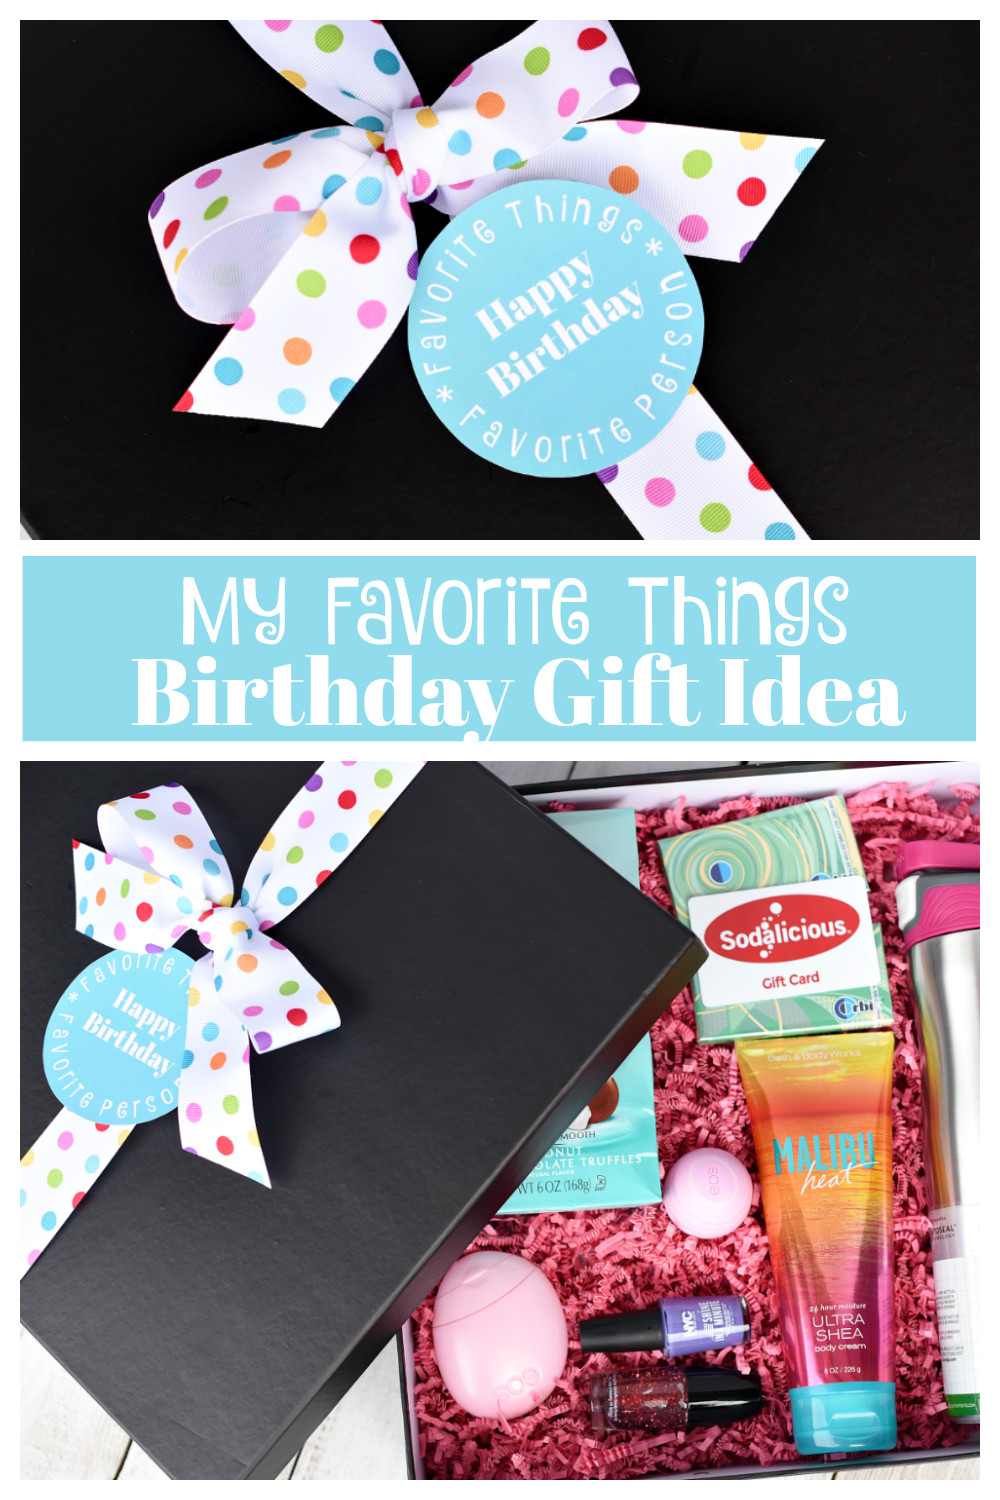 Bday Gift Ideas For Best Friend
 My Favorite Things Birthday Gifts for Your Best Friend